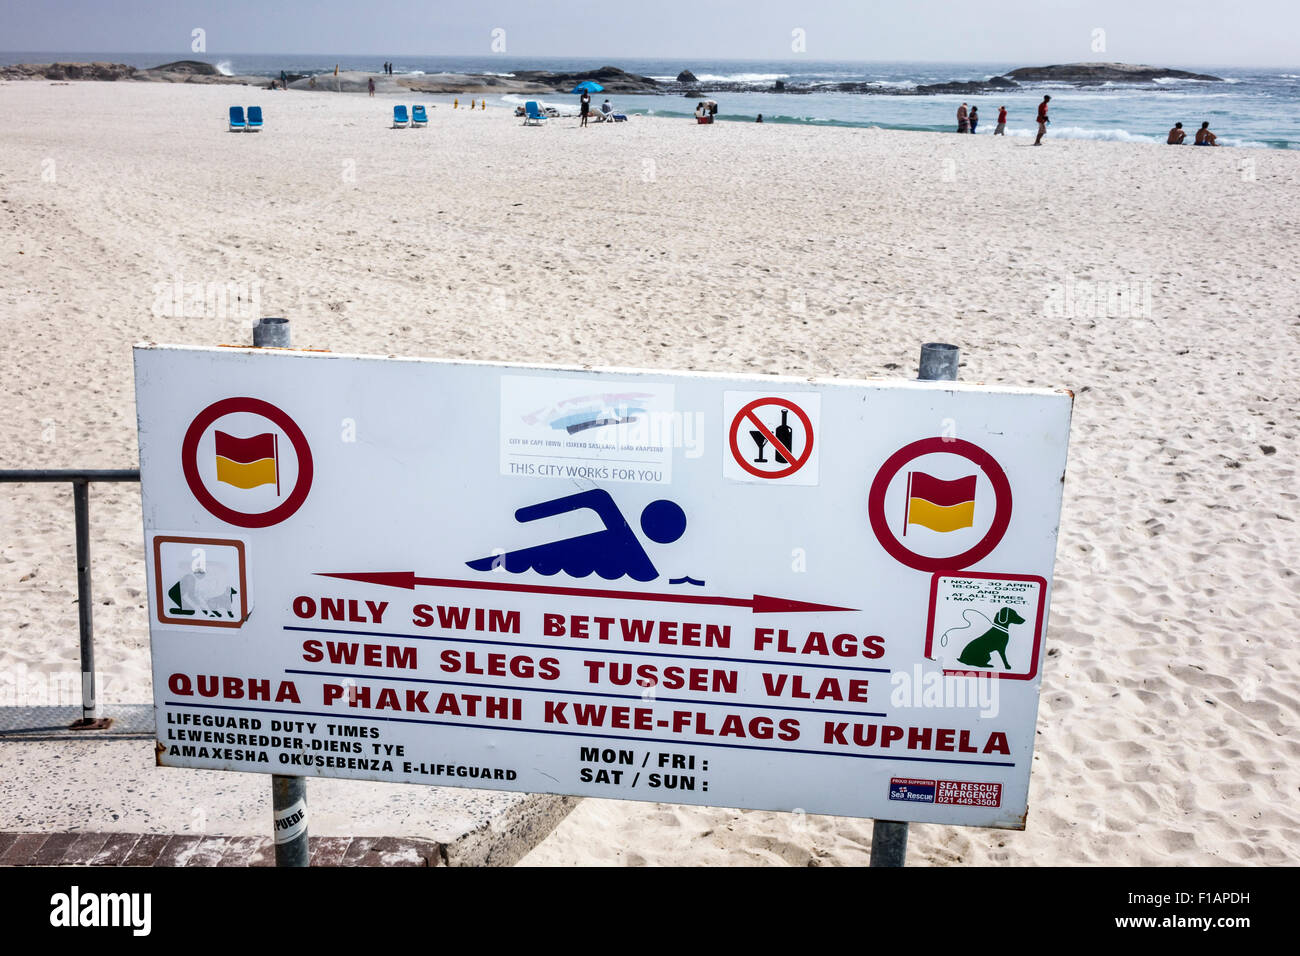 Cape Town South Africa,Camps Bay,Victoria Road,Table Mountain National Park,public beach park,sign,English Afrikaans,Zulu,languages,bilingual,multilin Stock Photo